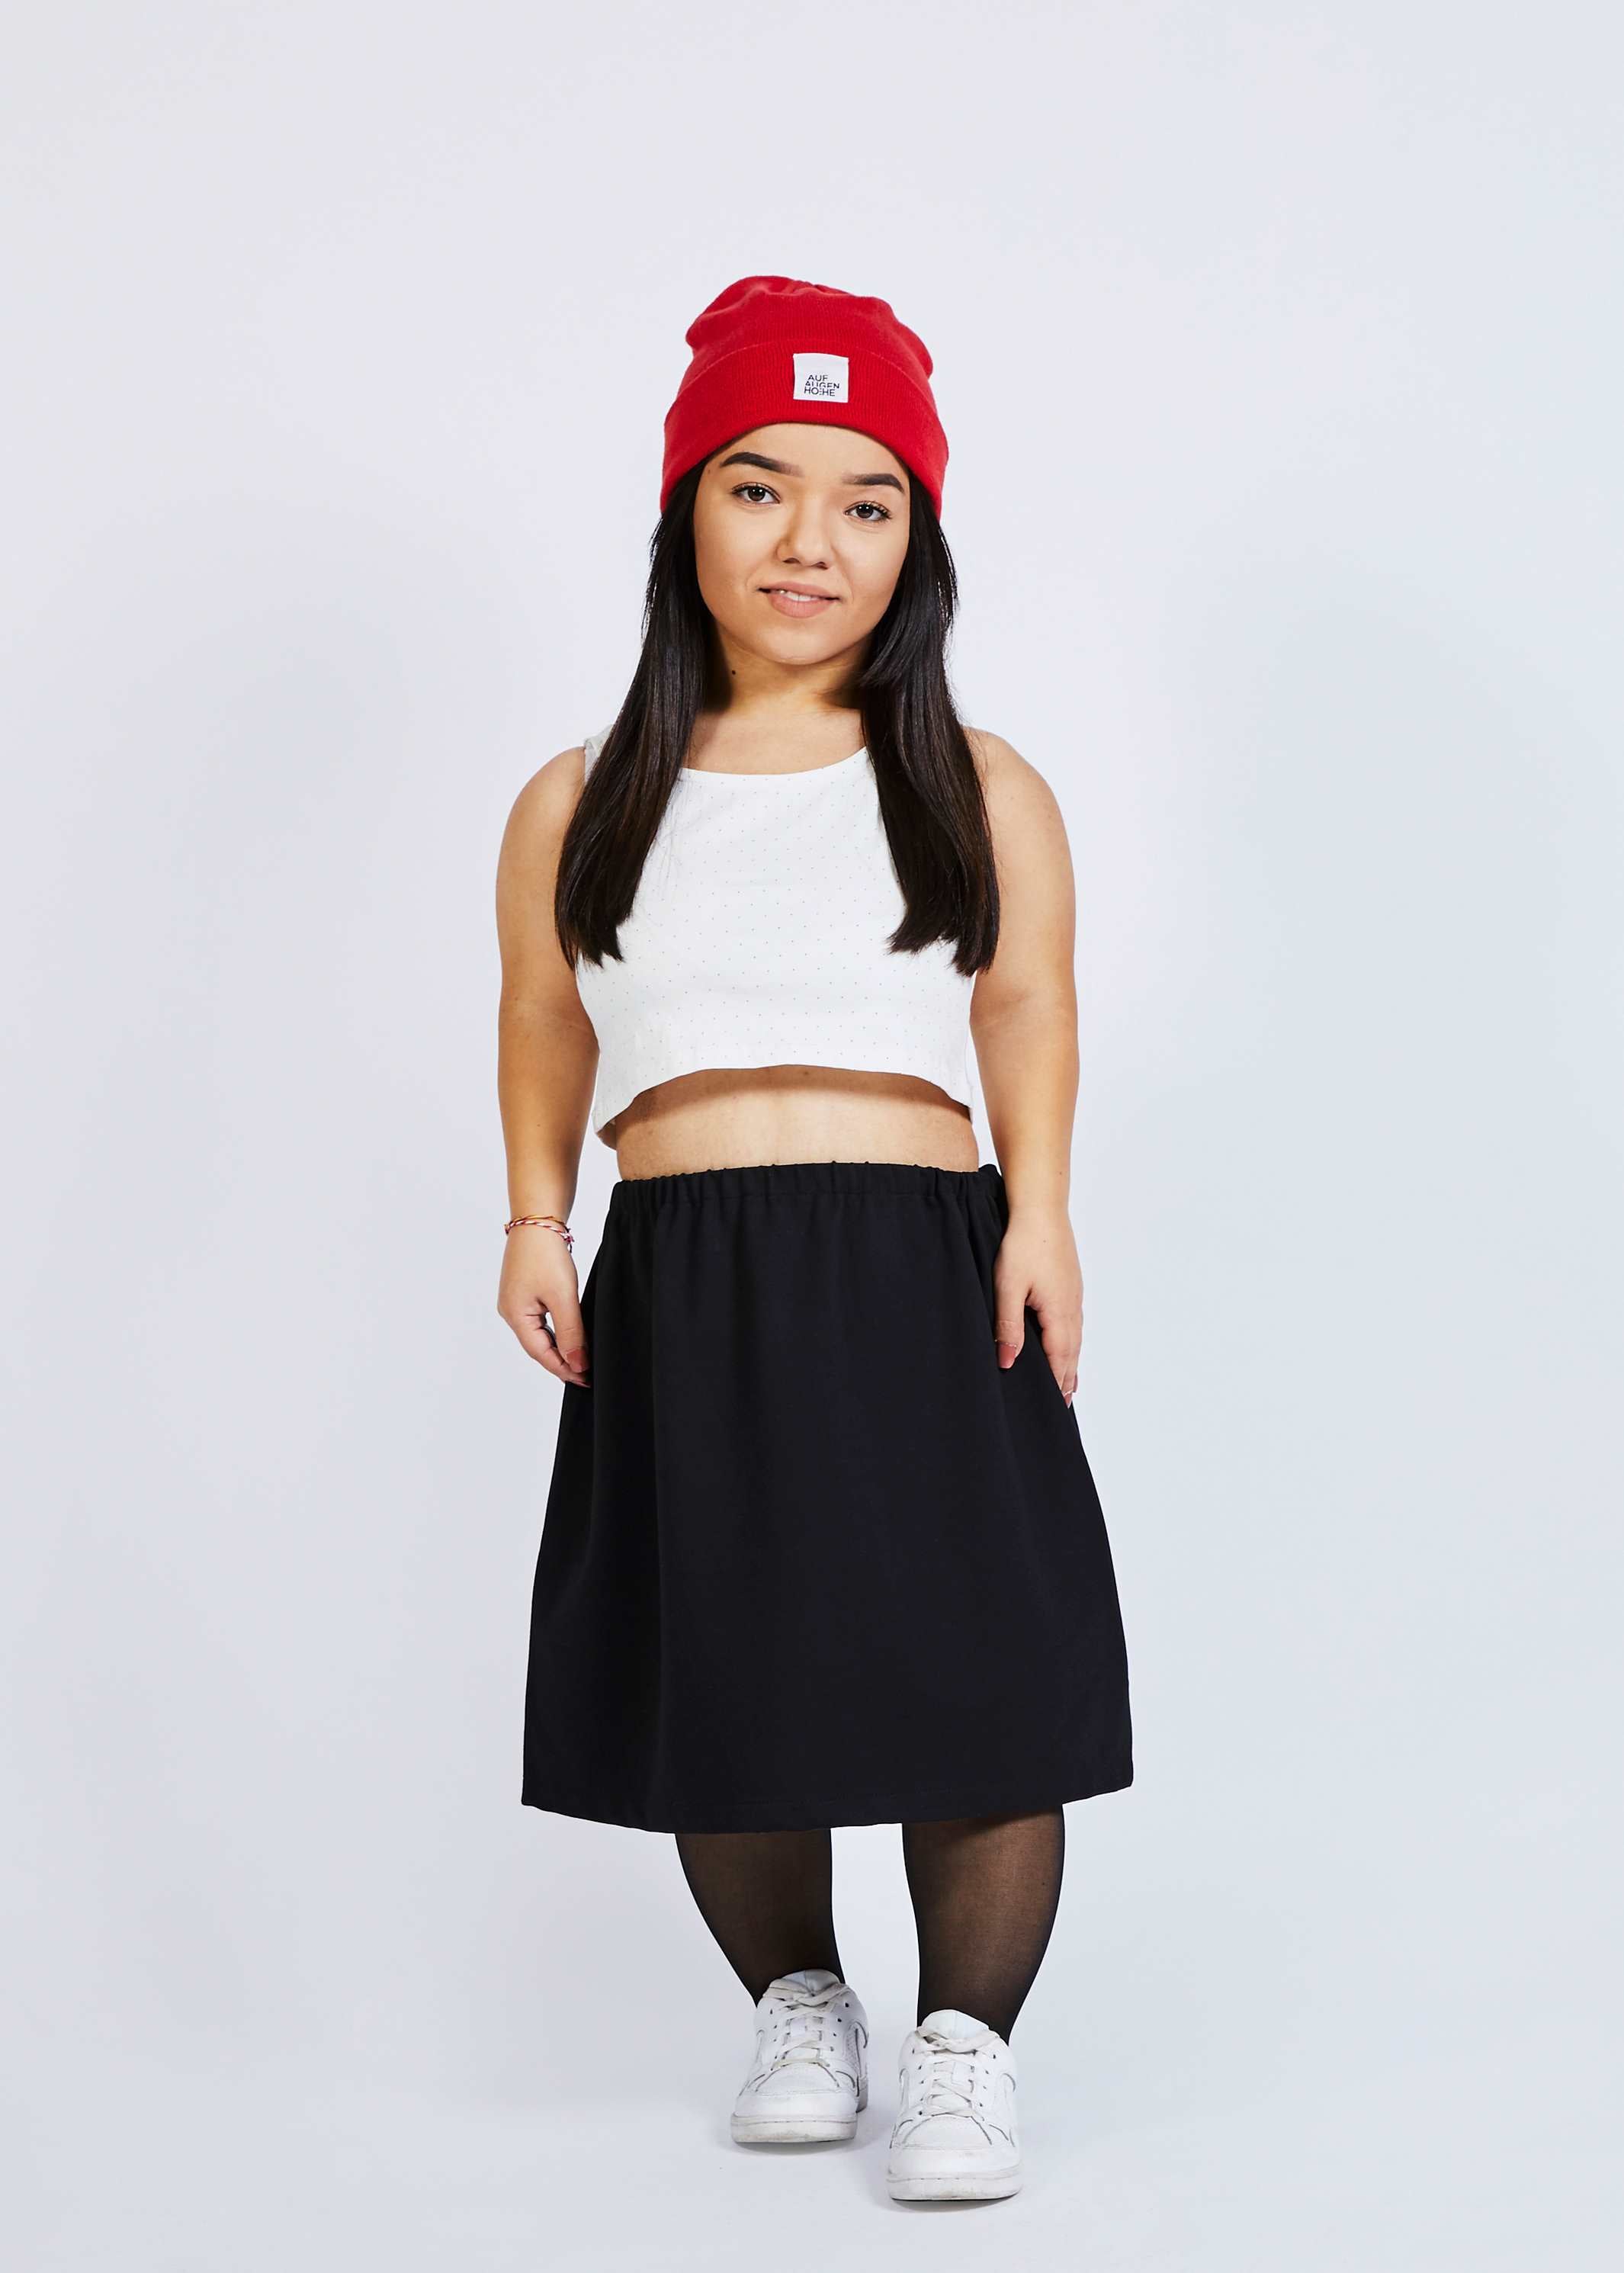 woman with dwarfism wearing black skirt, tights, white croptop, red beanie and white shoes